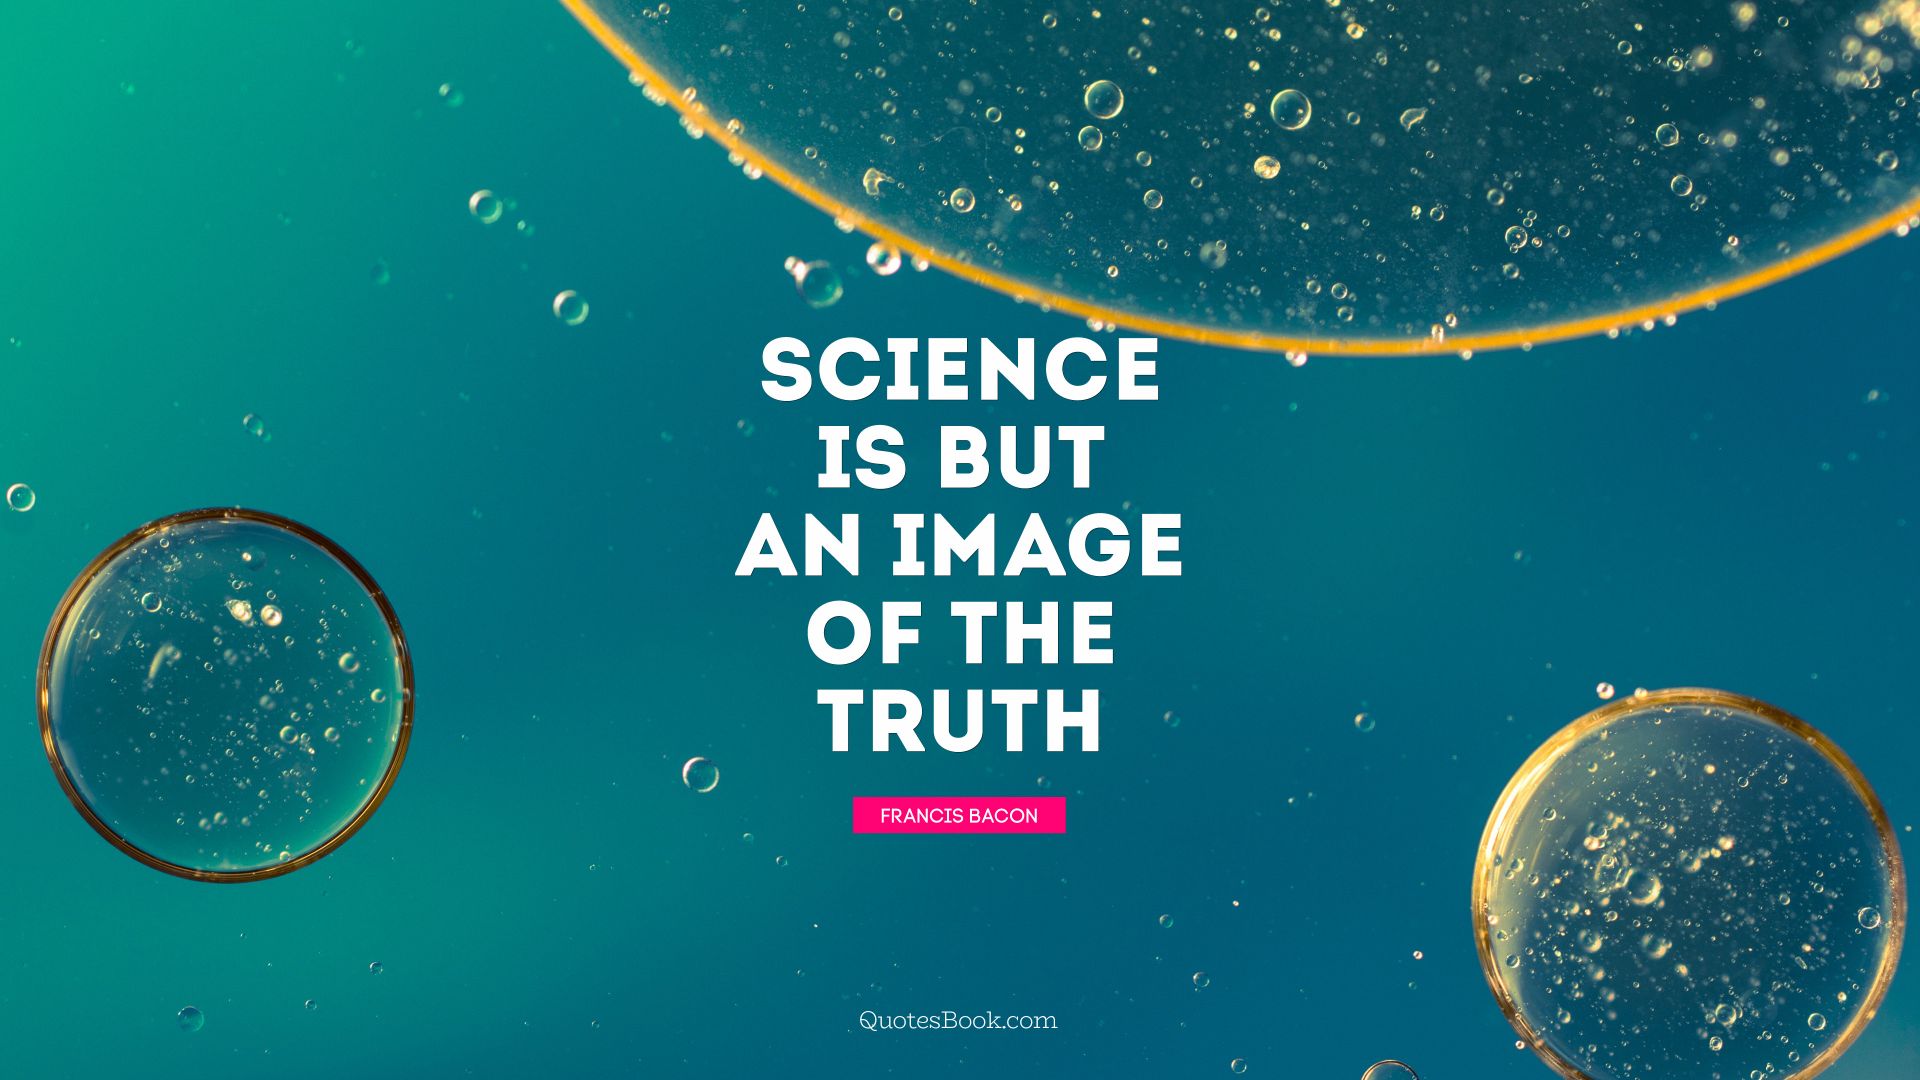 Science is but an image of the truth. - Quote by Francis Bacon